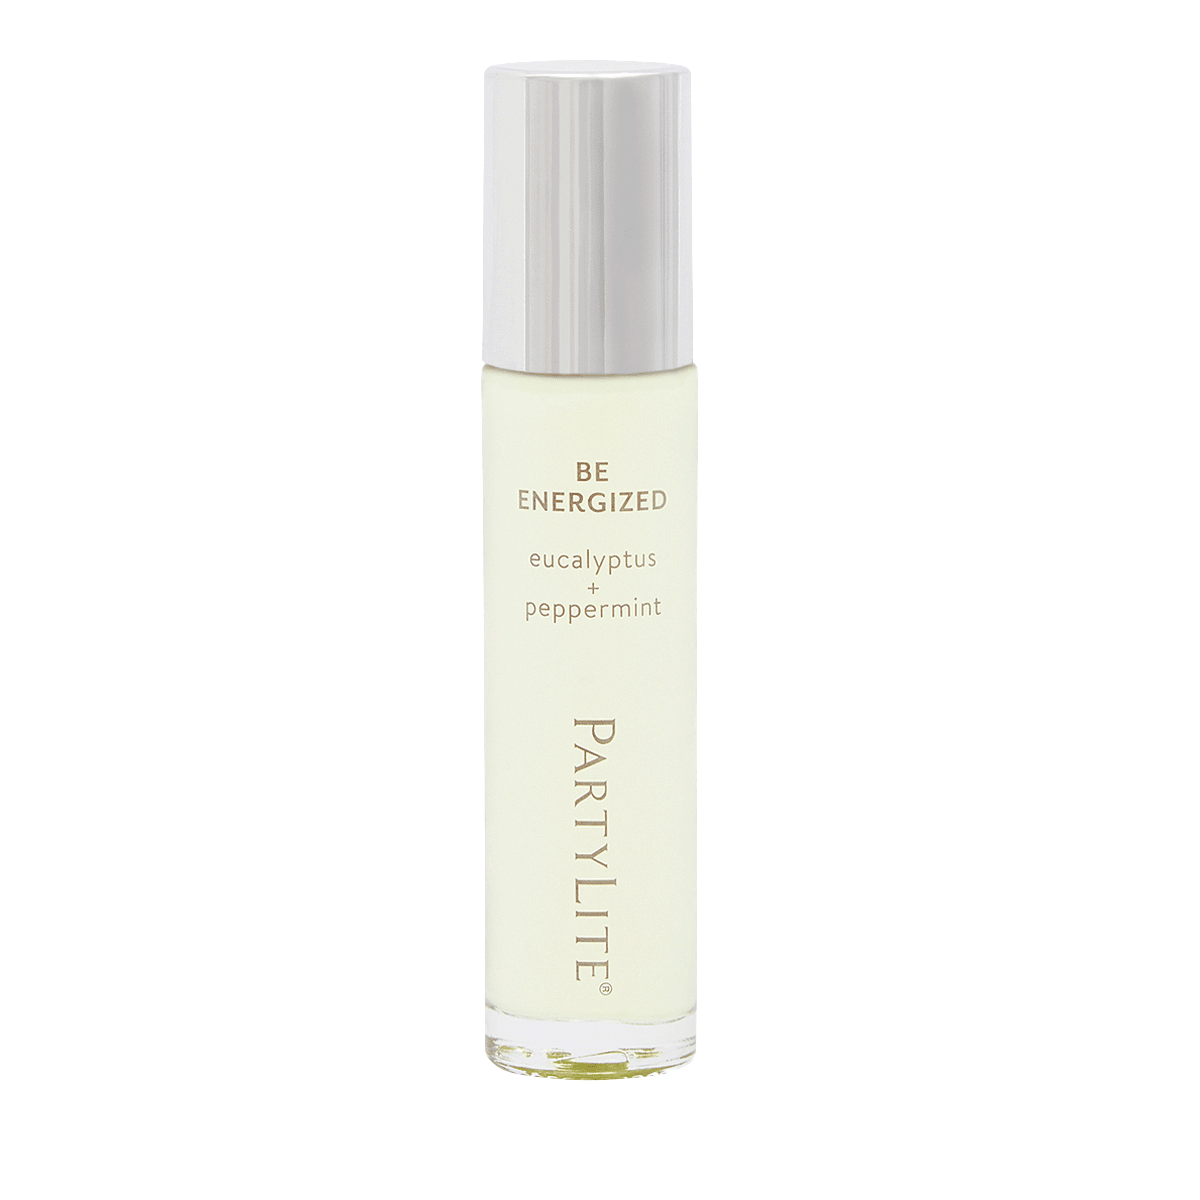 Be Energized Eucalyptus + Peppermint Essential Oil Rollerball - PartyLite US